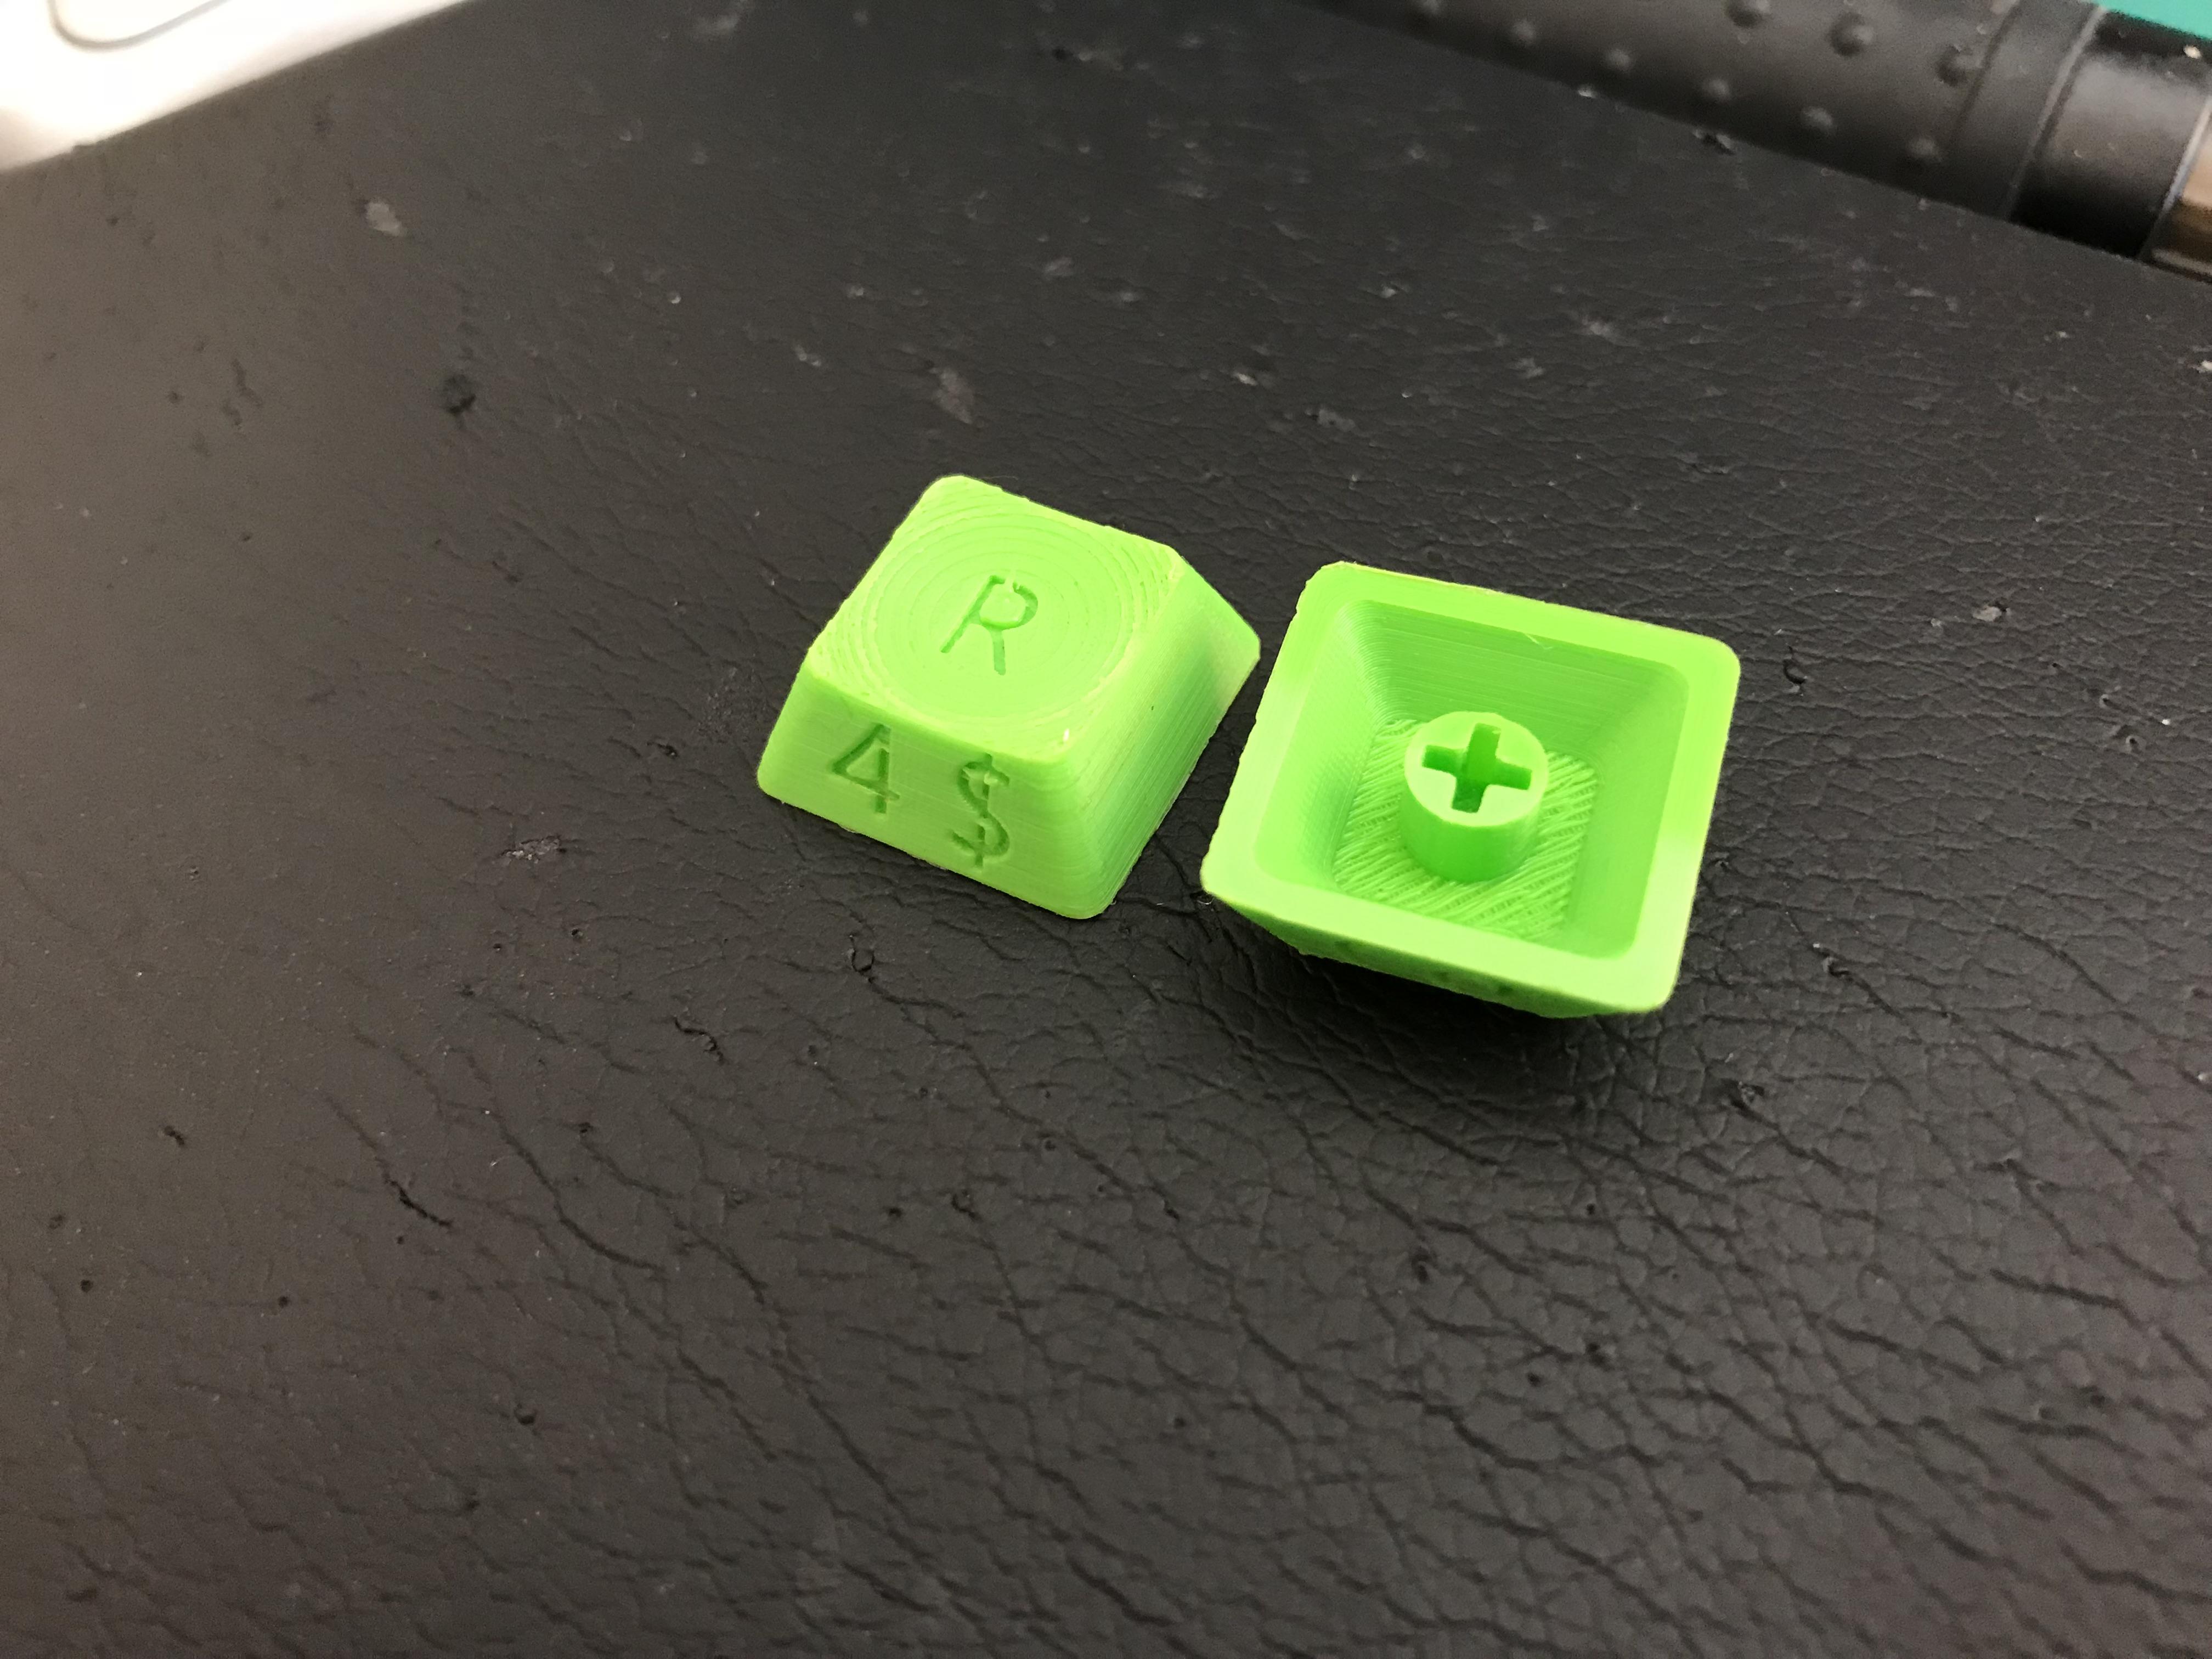 3D printer capable of printing keycaps consistently?